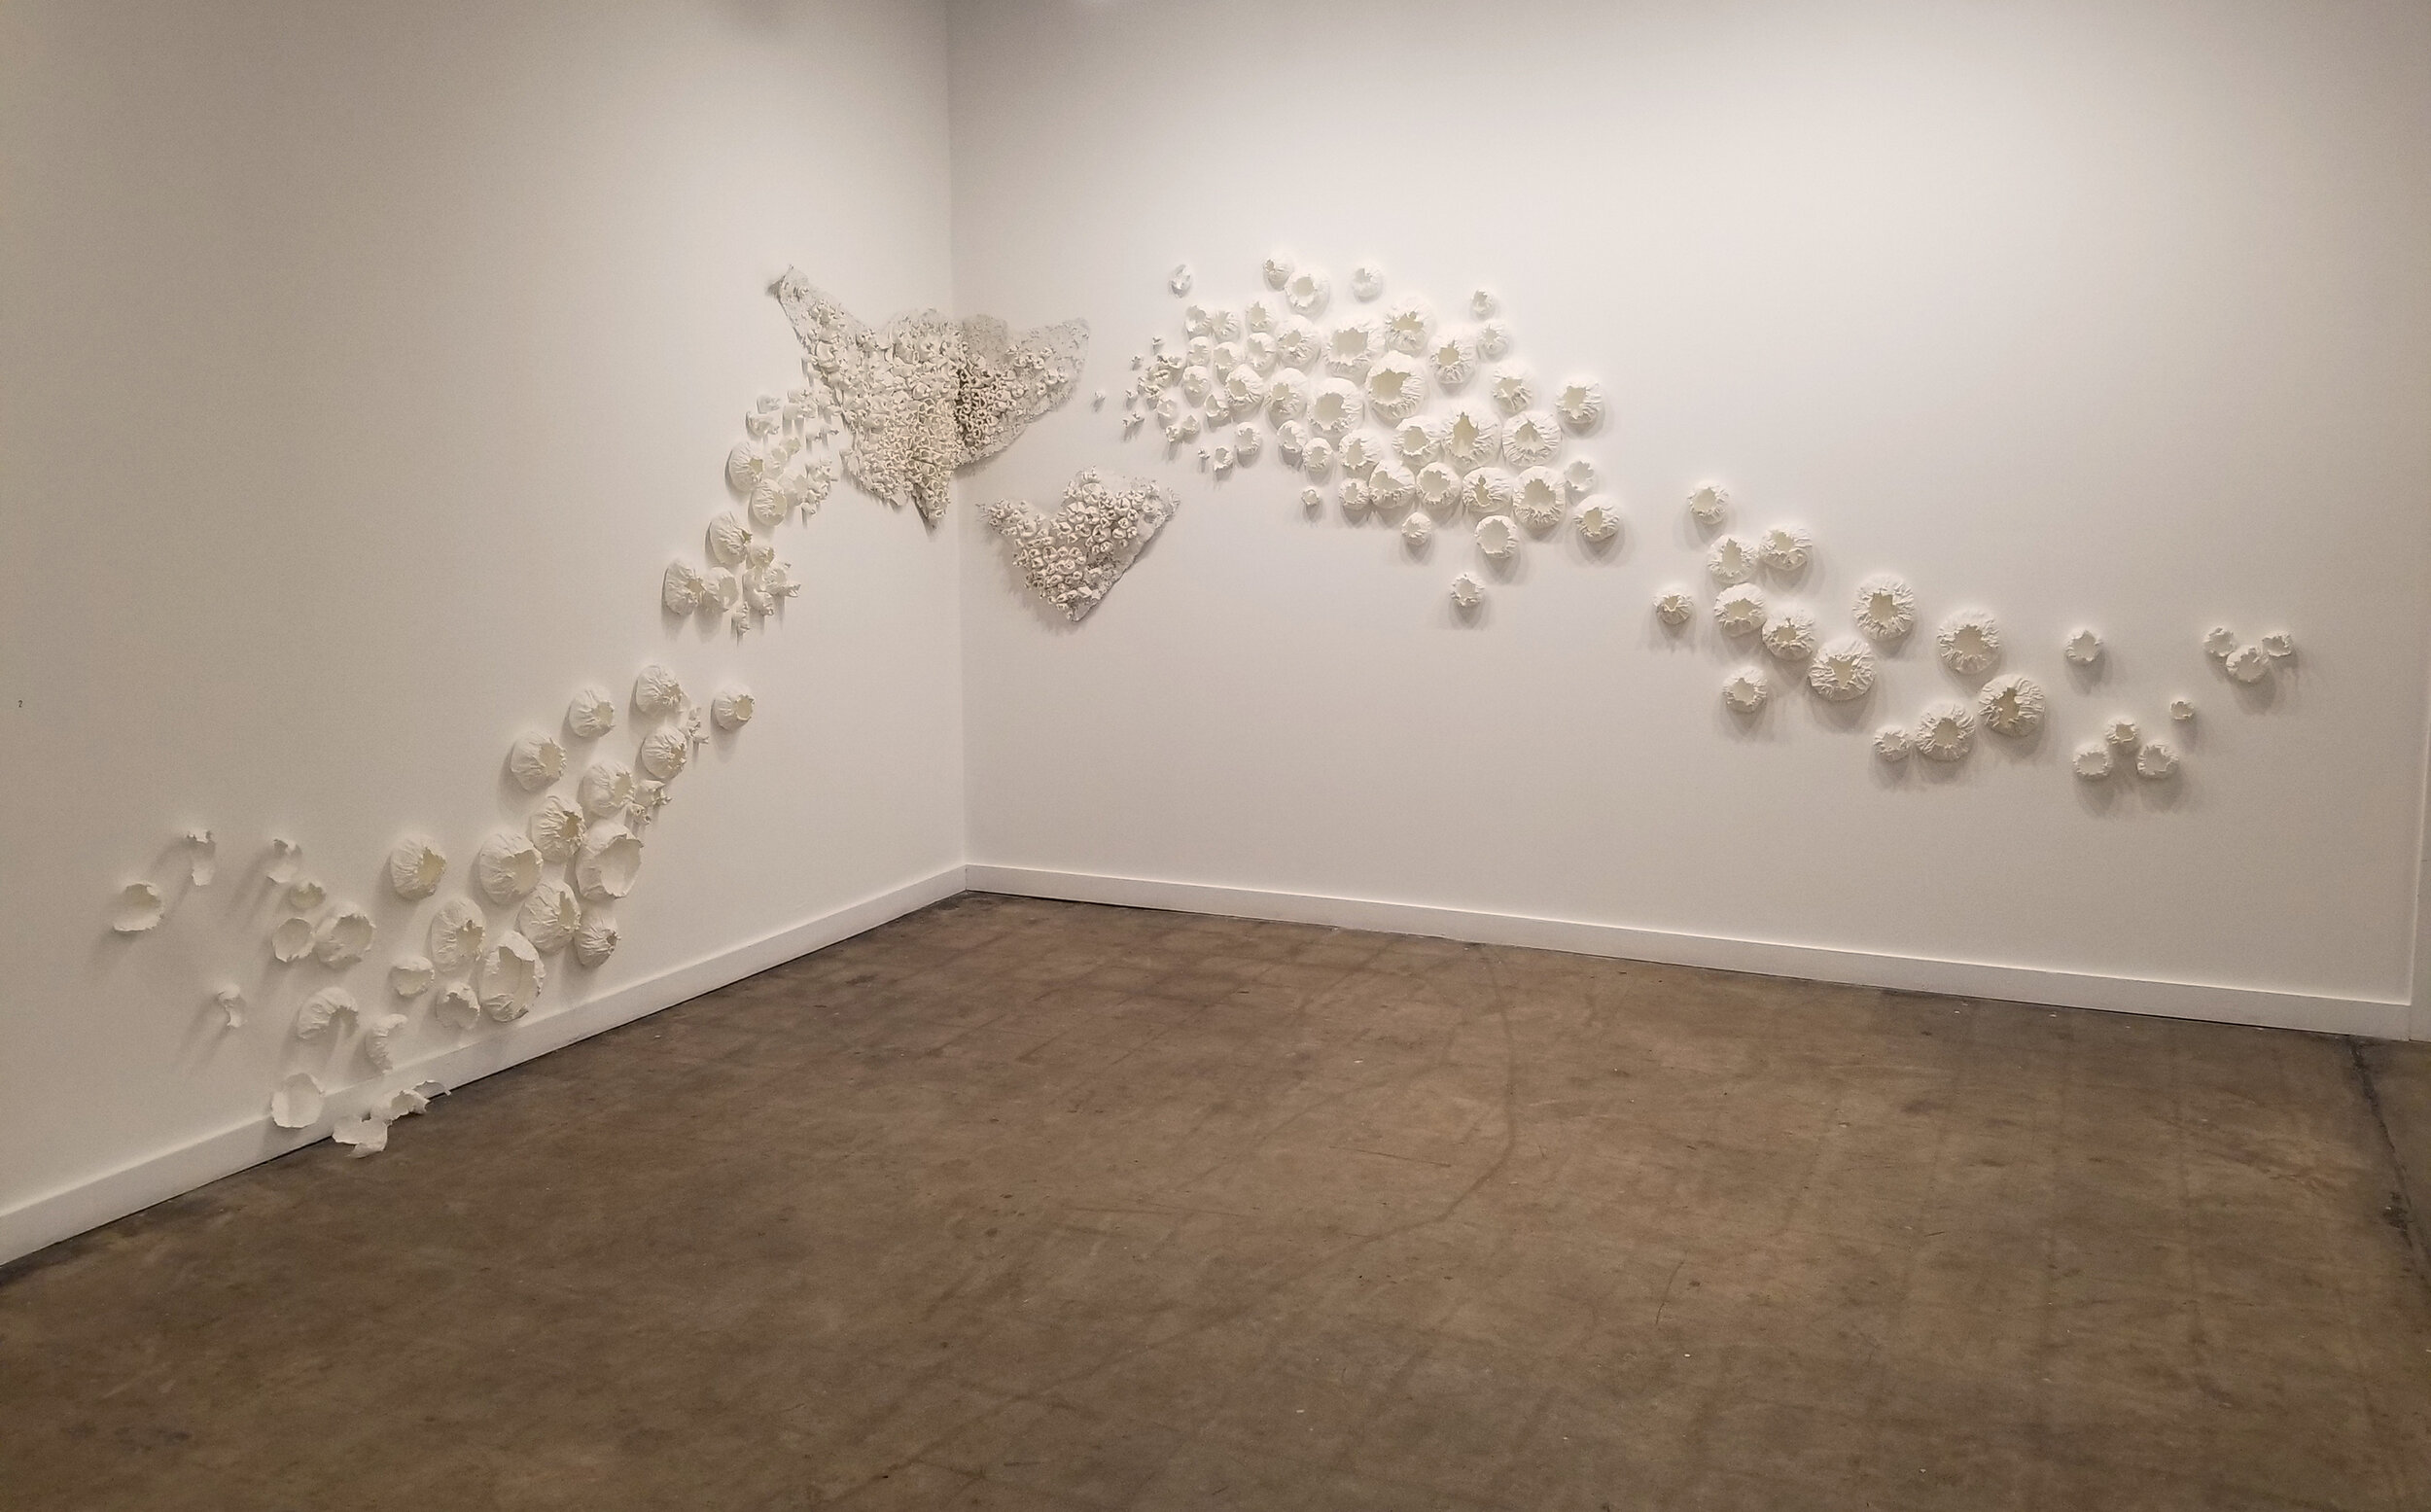   Accumulation , 2019, handmade cotton paper, wire mesh, dimensions variable   